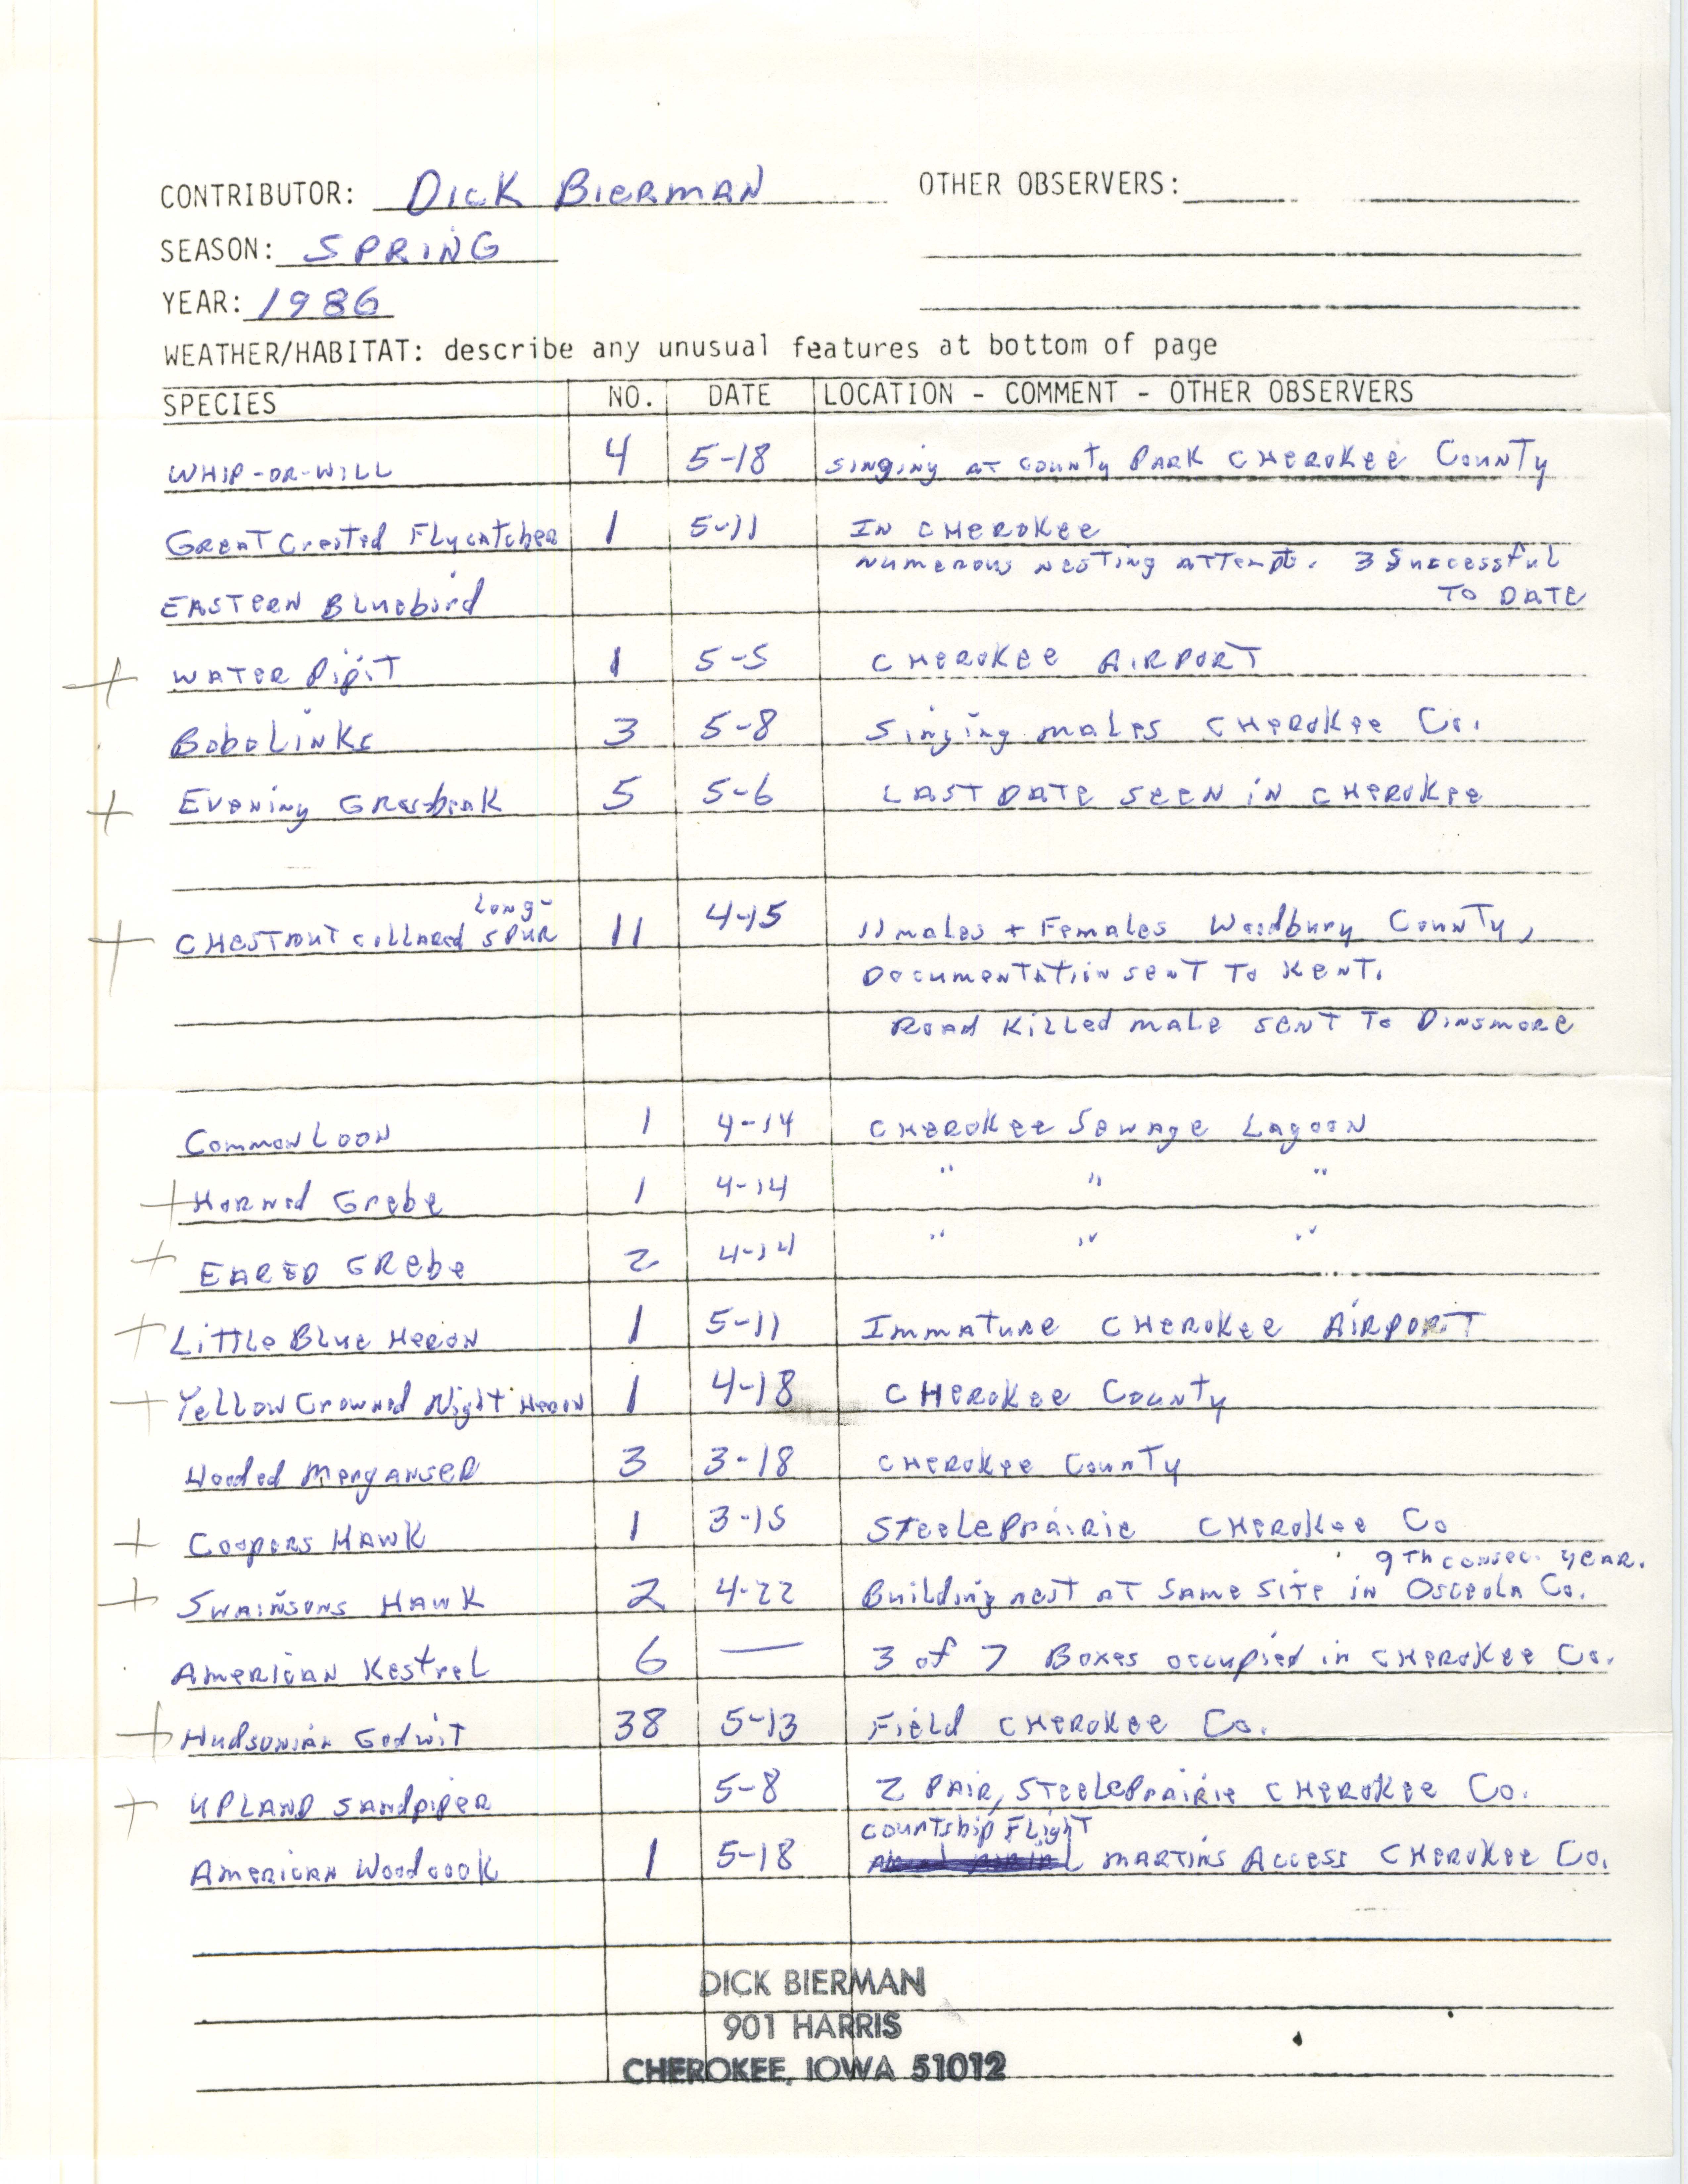 Annotated bird sighting list for Spring 1986 compiled by Dick Bierman